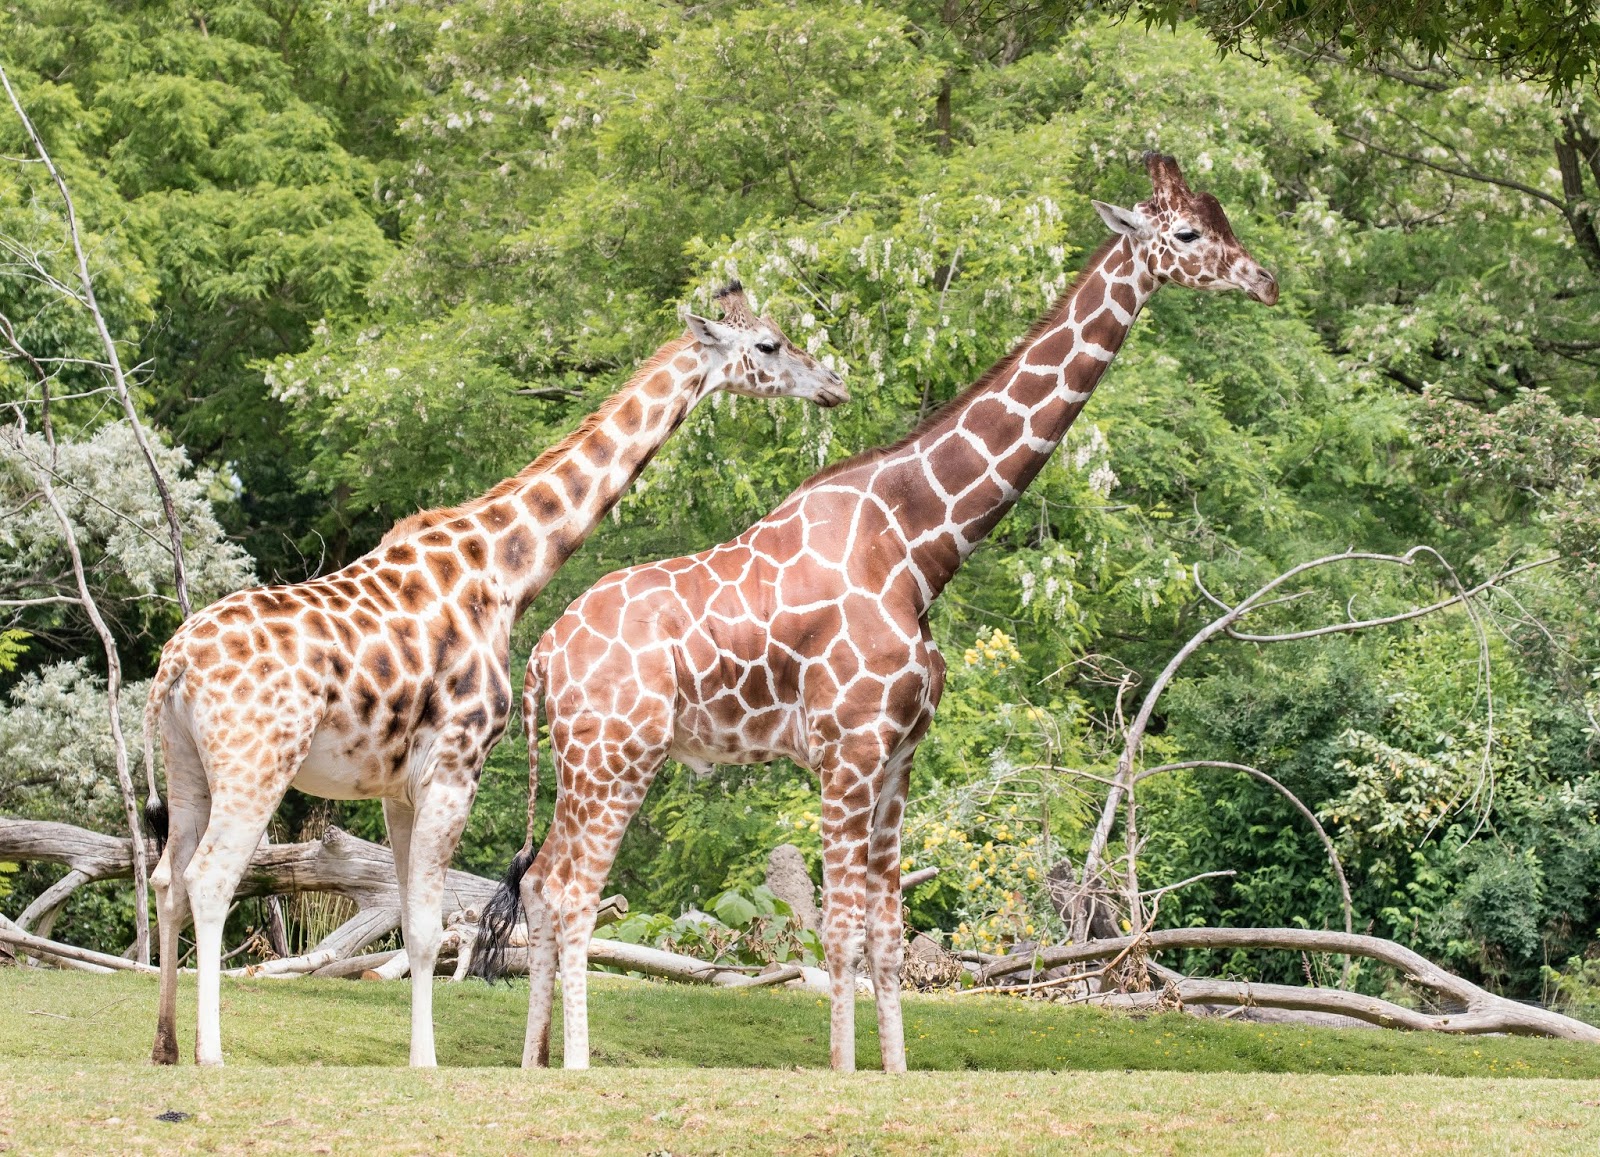 What to Expect When You're Expecting a Baby Giraffe